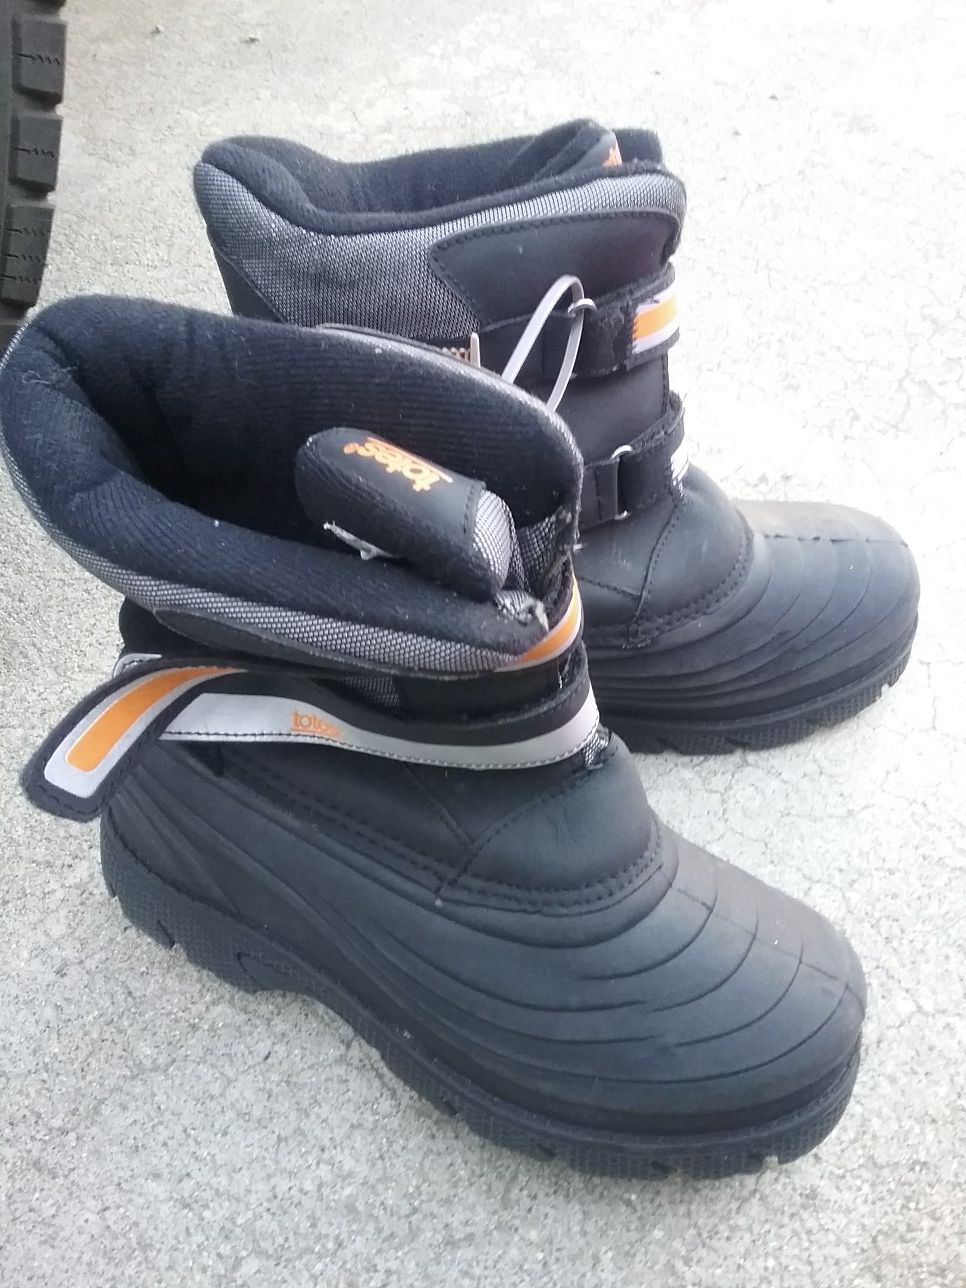 Snow boots, mens 6, like new